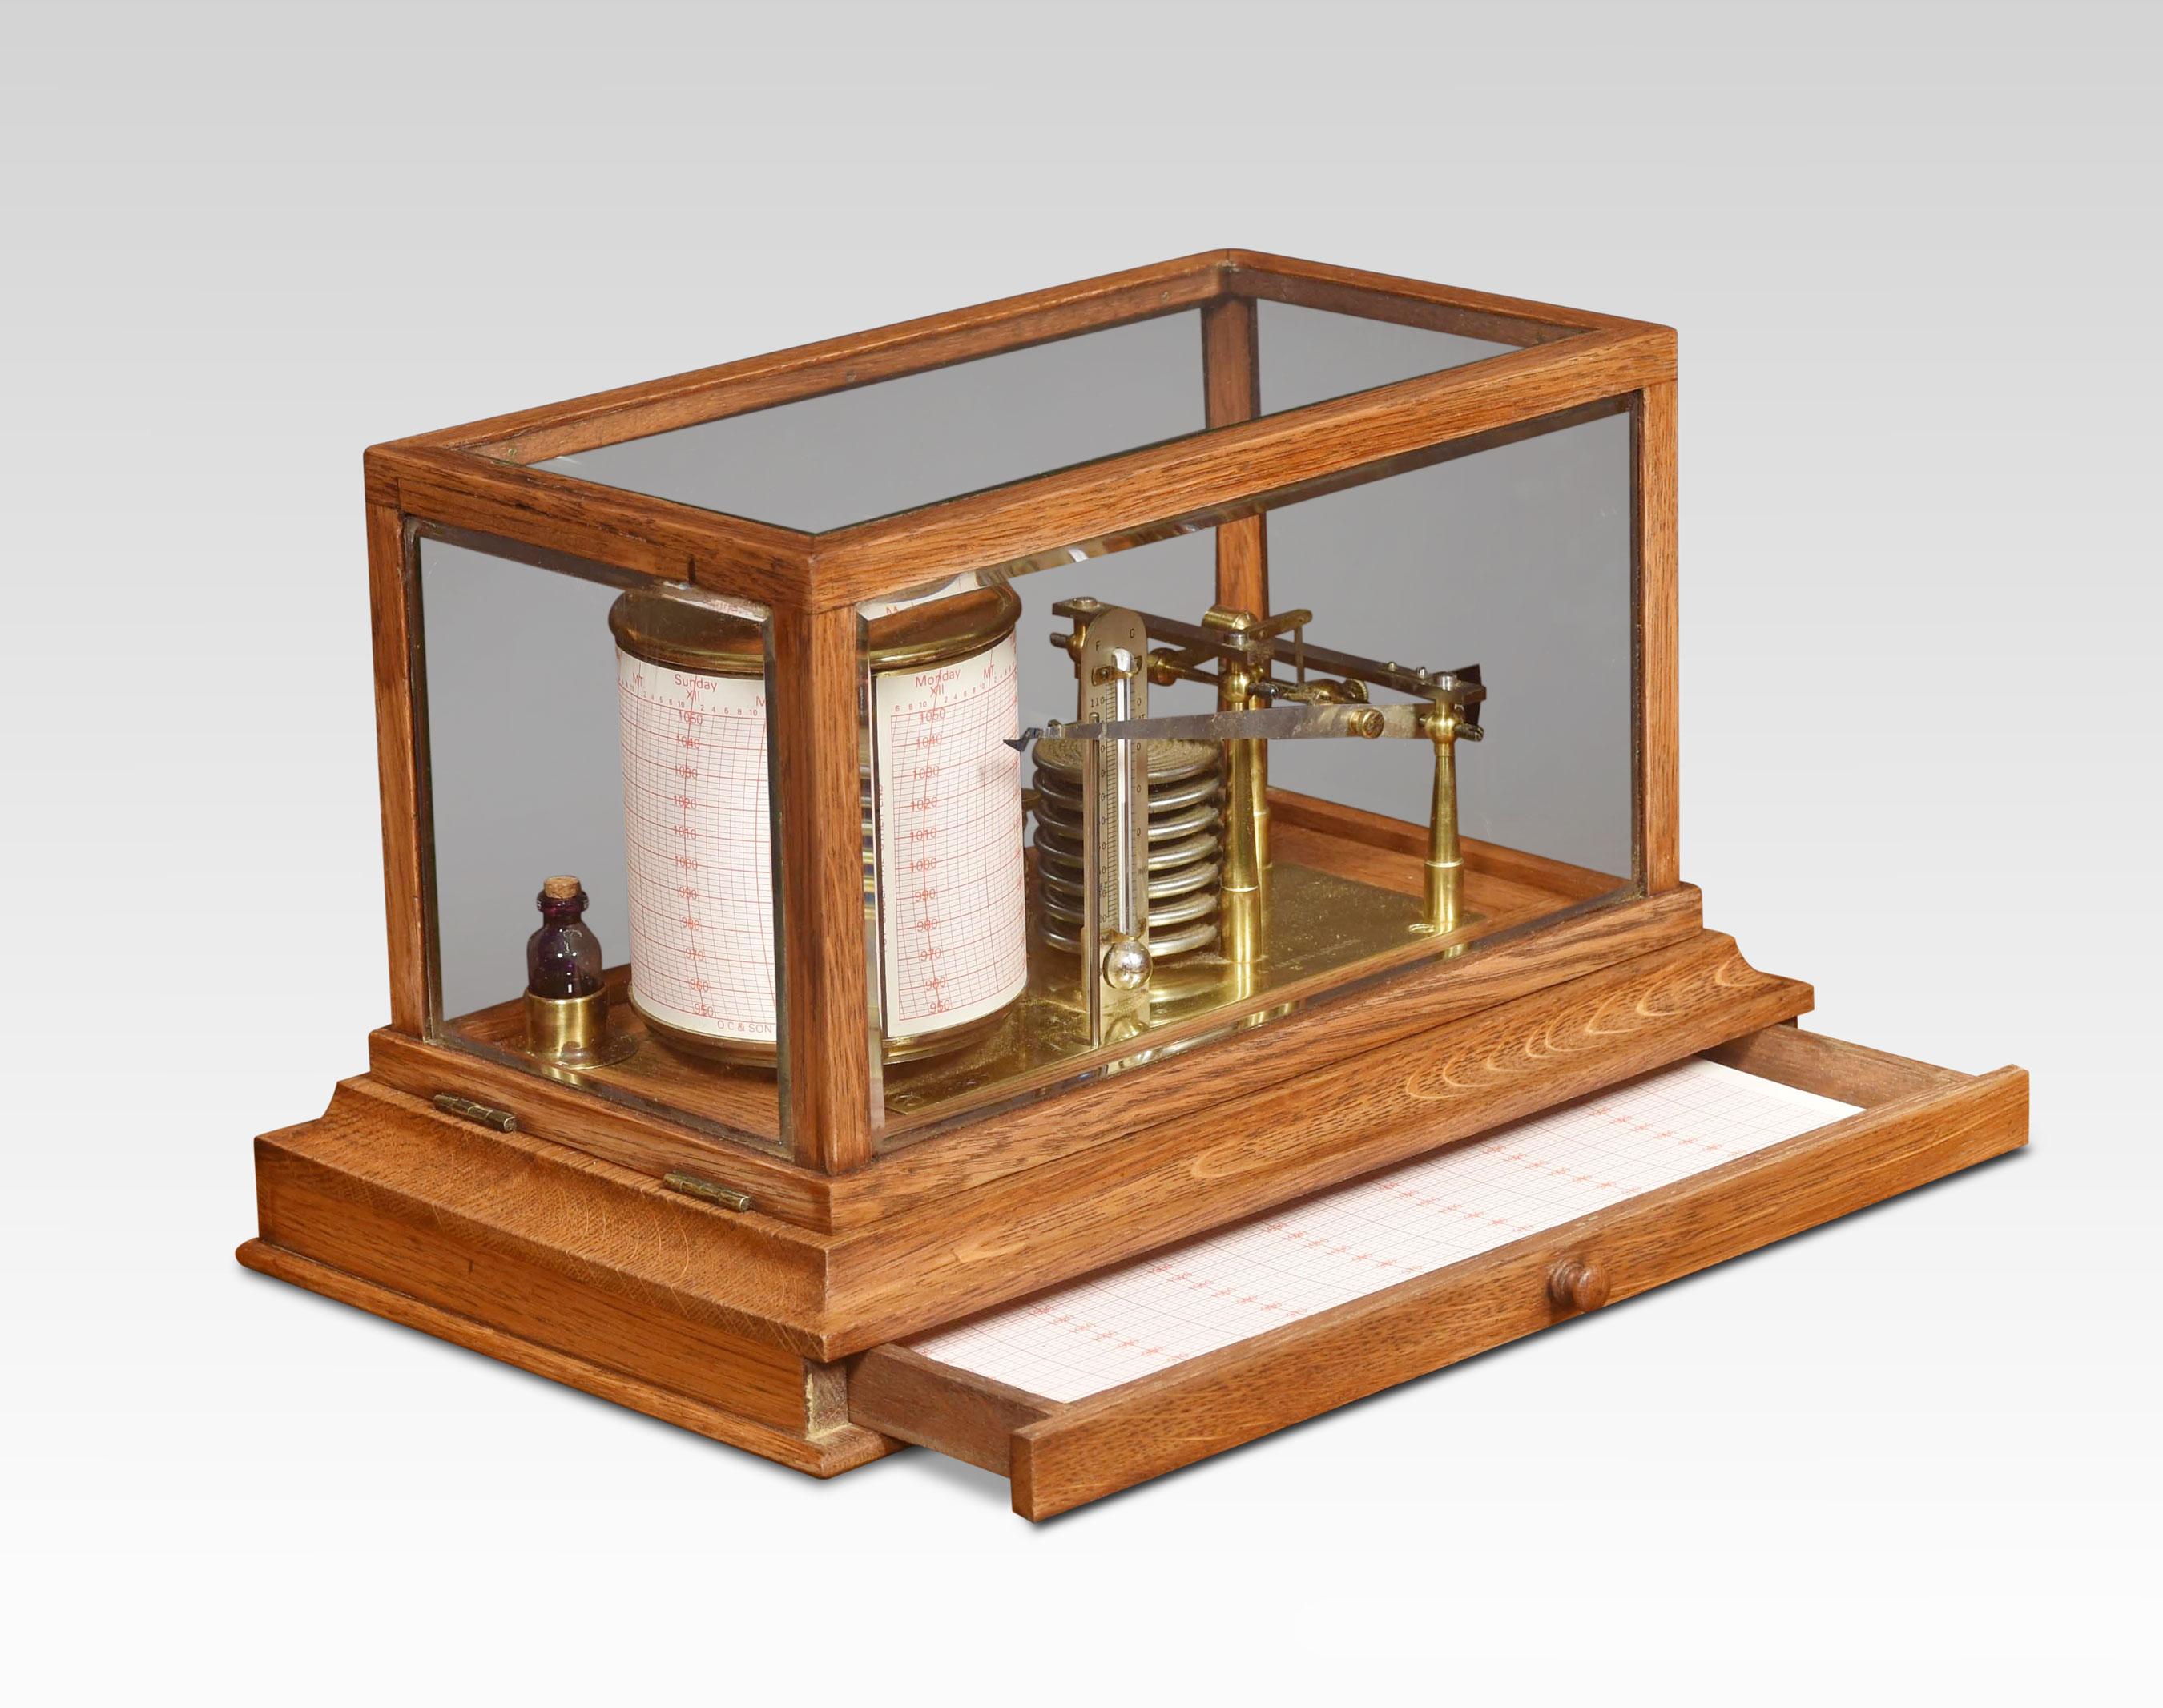 oak cased barograph and thermometer by Negretti & Zambra, having a hinged five-beveled glazed removable lid. The mechanical eight-day movement is housed in the drum, fitted with a seven-day chart that covers one full rotation of the drum. The ink